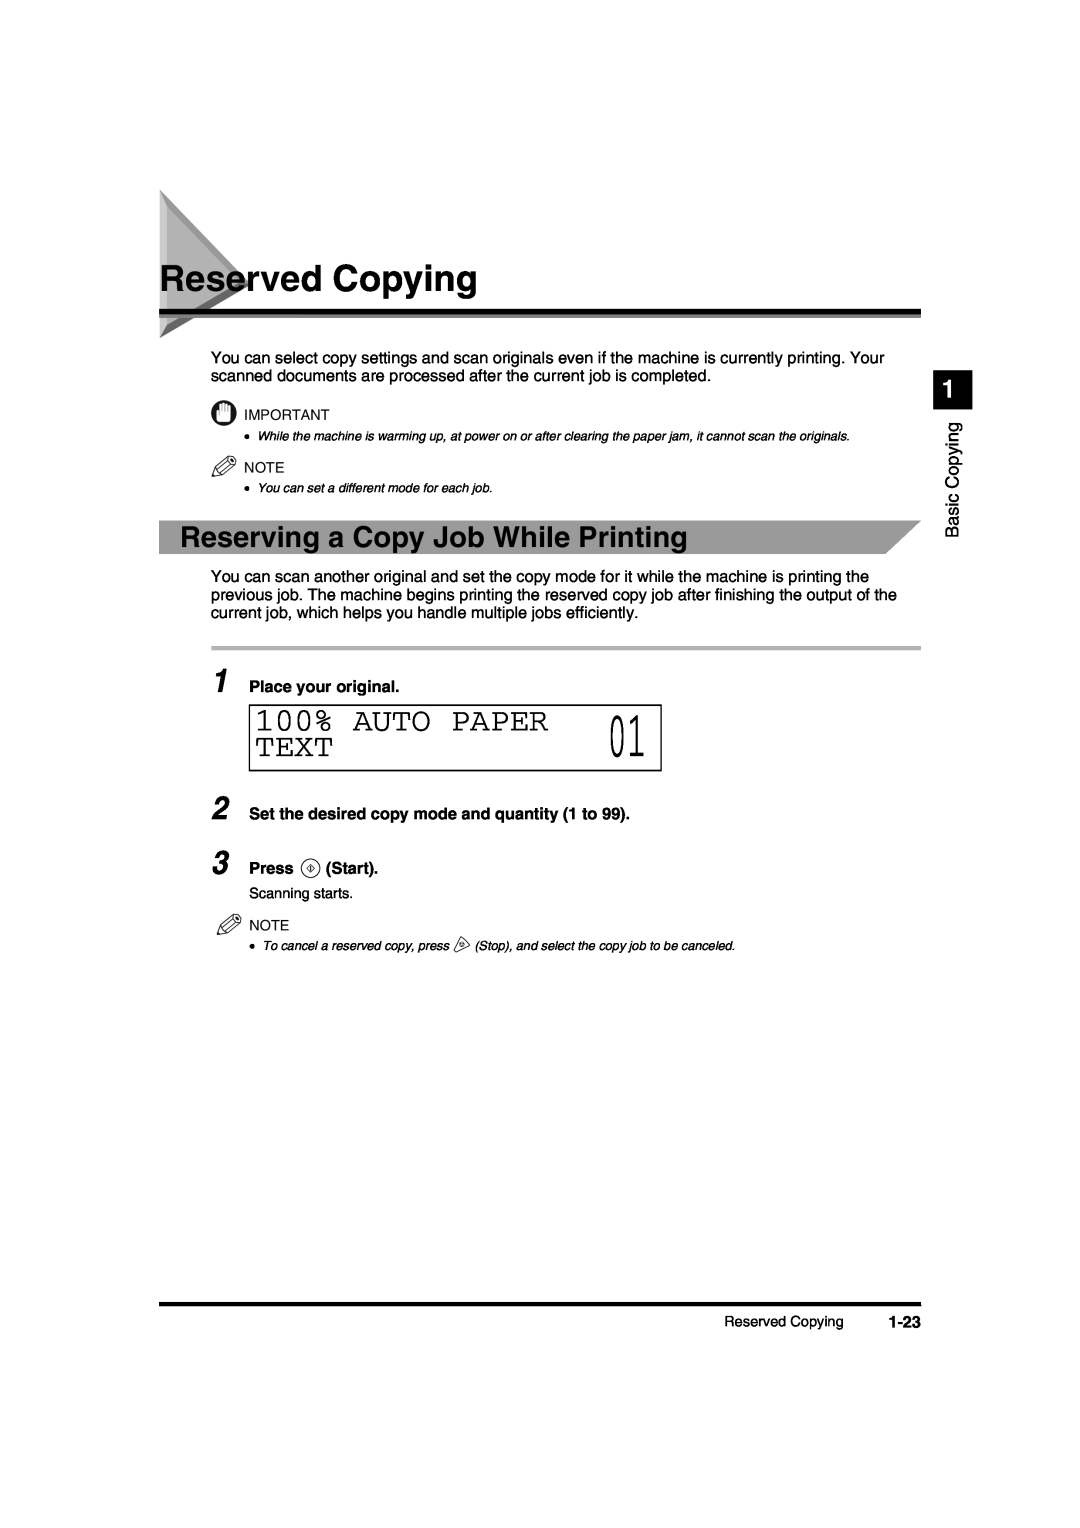 Canon IR1600 manual Reserved Copying, Reserving a Copy Job While Printing, 1-23, 100%, Auto Paper, Text, Basic Copying 